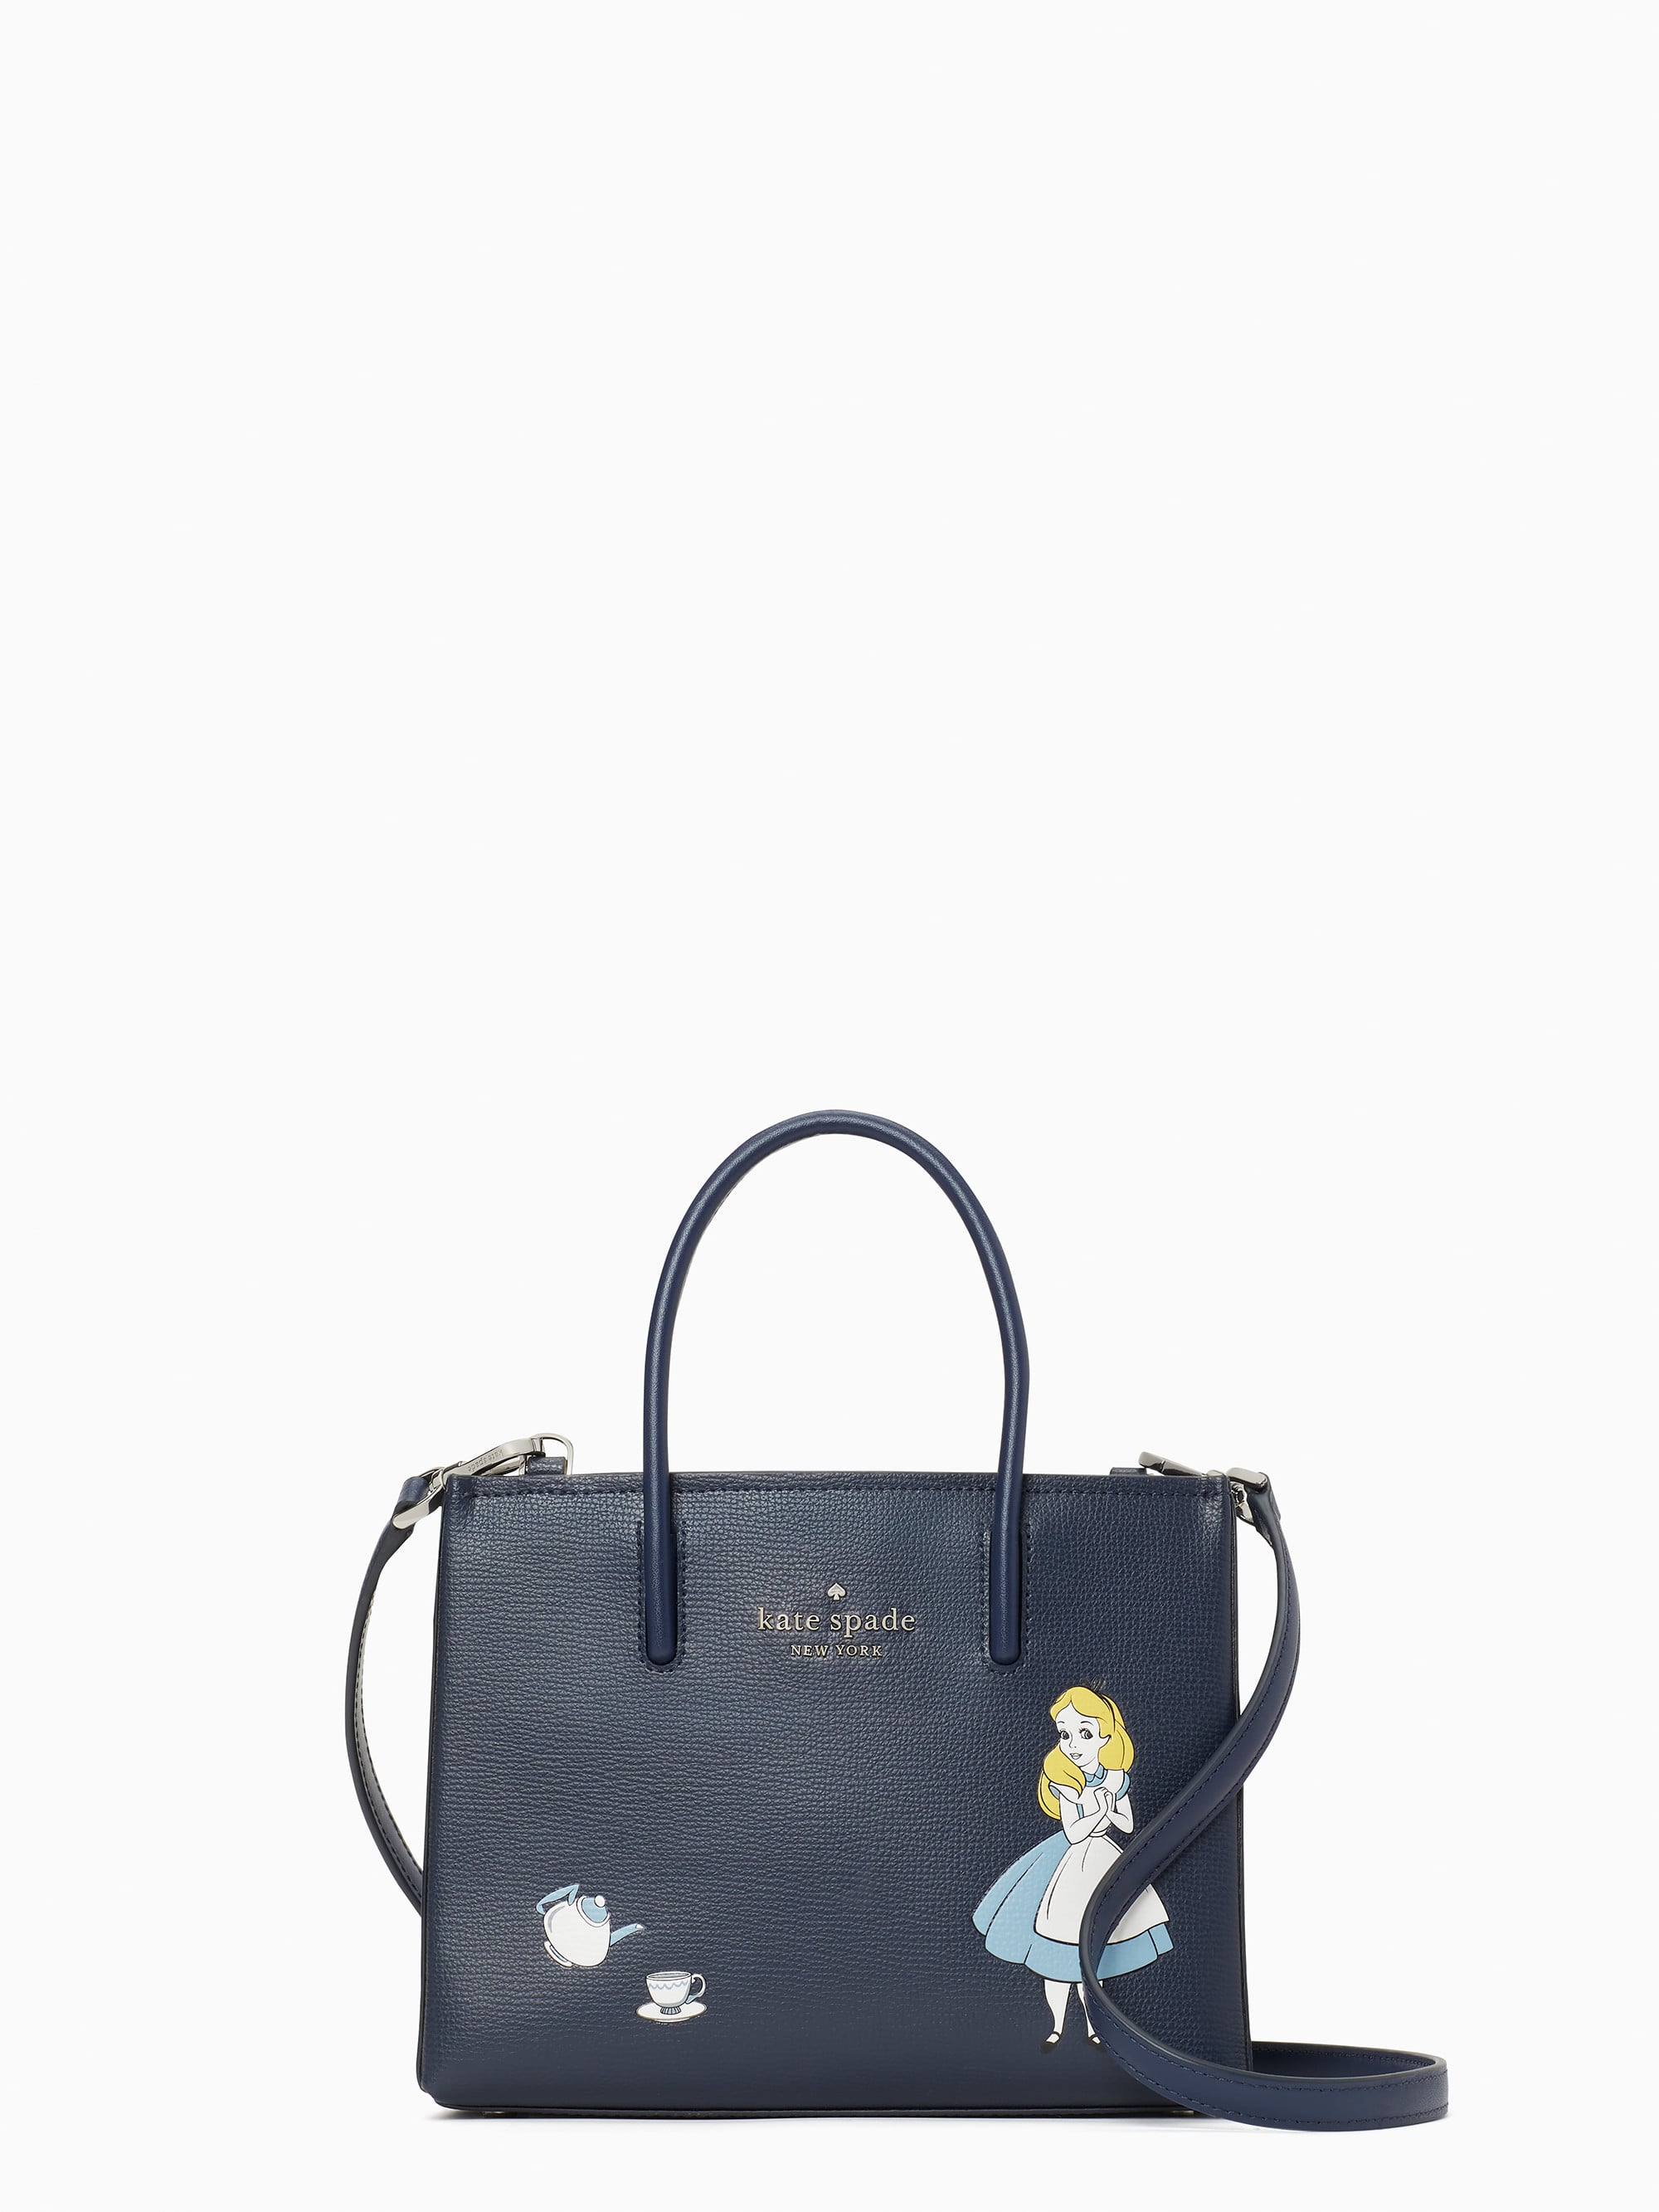 A Whimsical Bag: Disney x Kate Spade New York Alice in Wonderland Shopper  Crossbody Bag | Shhh! Kate Spade Is Having a Secret Sale With Discounts You  Have to See to Believe |